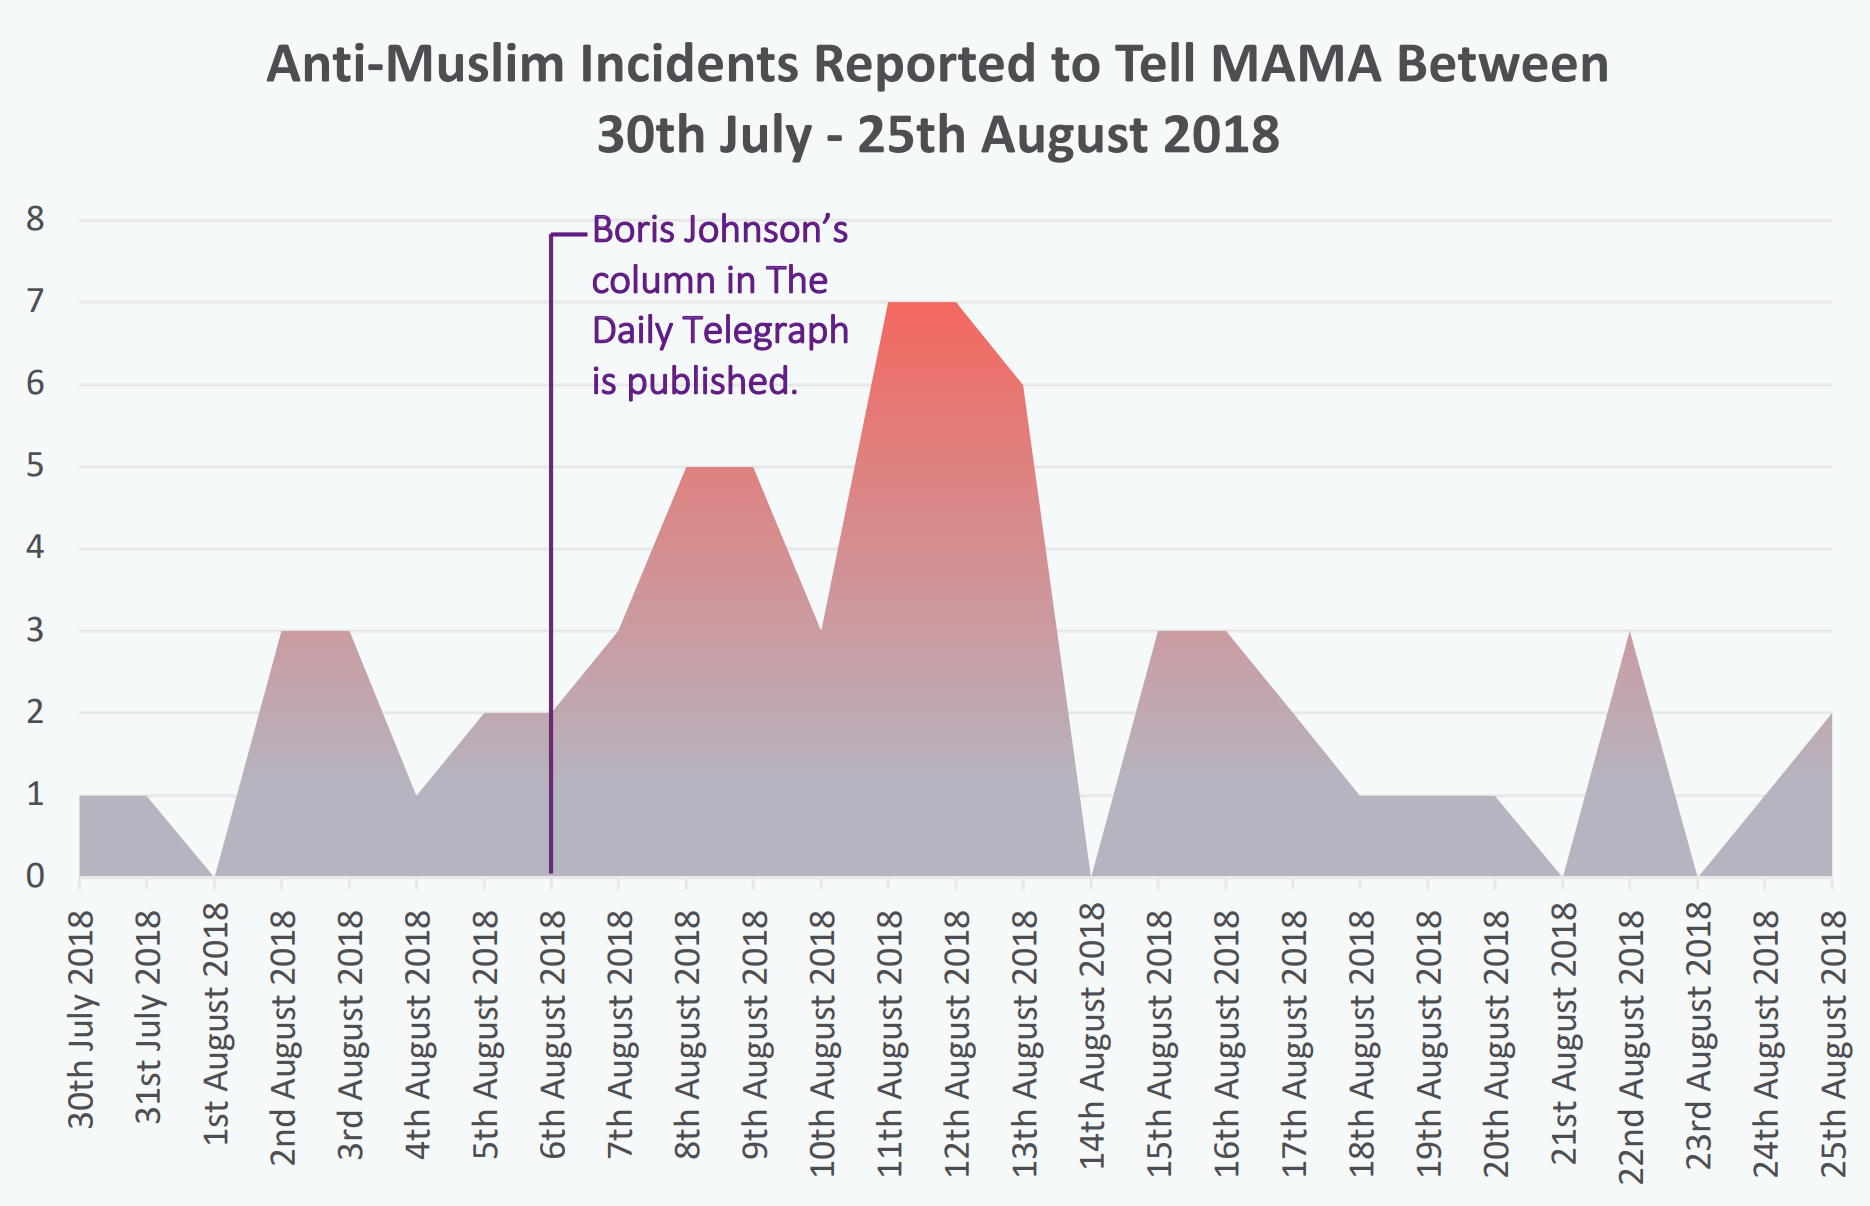 Anti-Muslim incidents reported to Tell MAMA between 30 July 2018 and 25 August 2018. Graphic: Tell MAMA UK